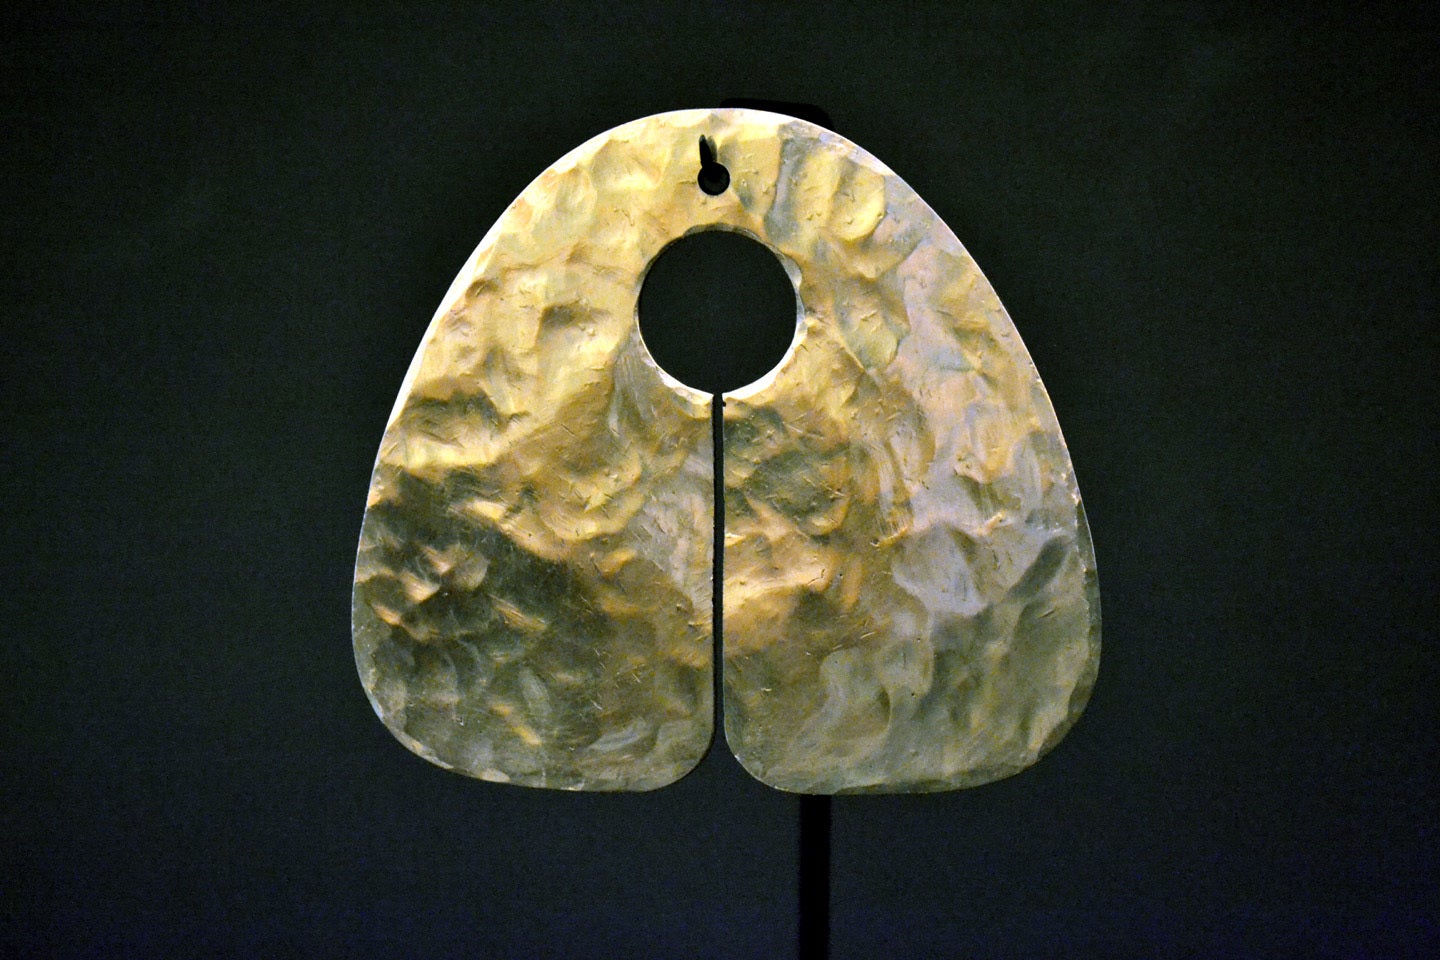 Fine and Rare Gold "Gong" Pendant by Harry Bertoia (1915-78)